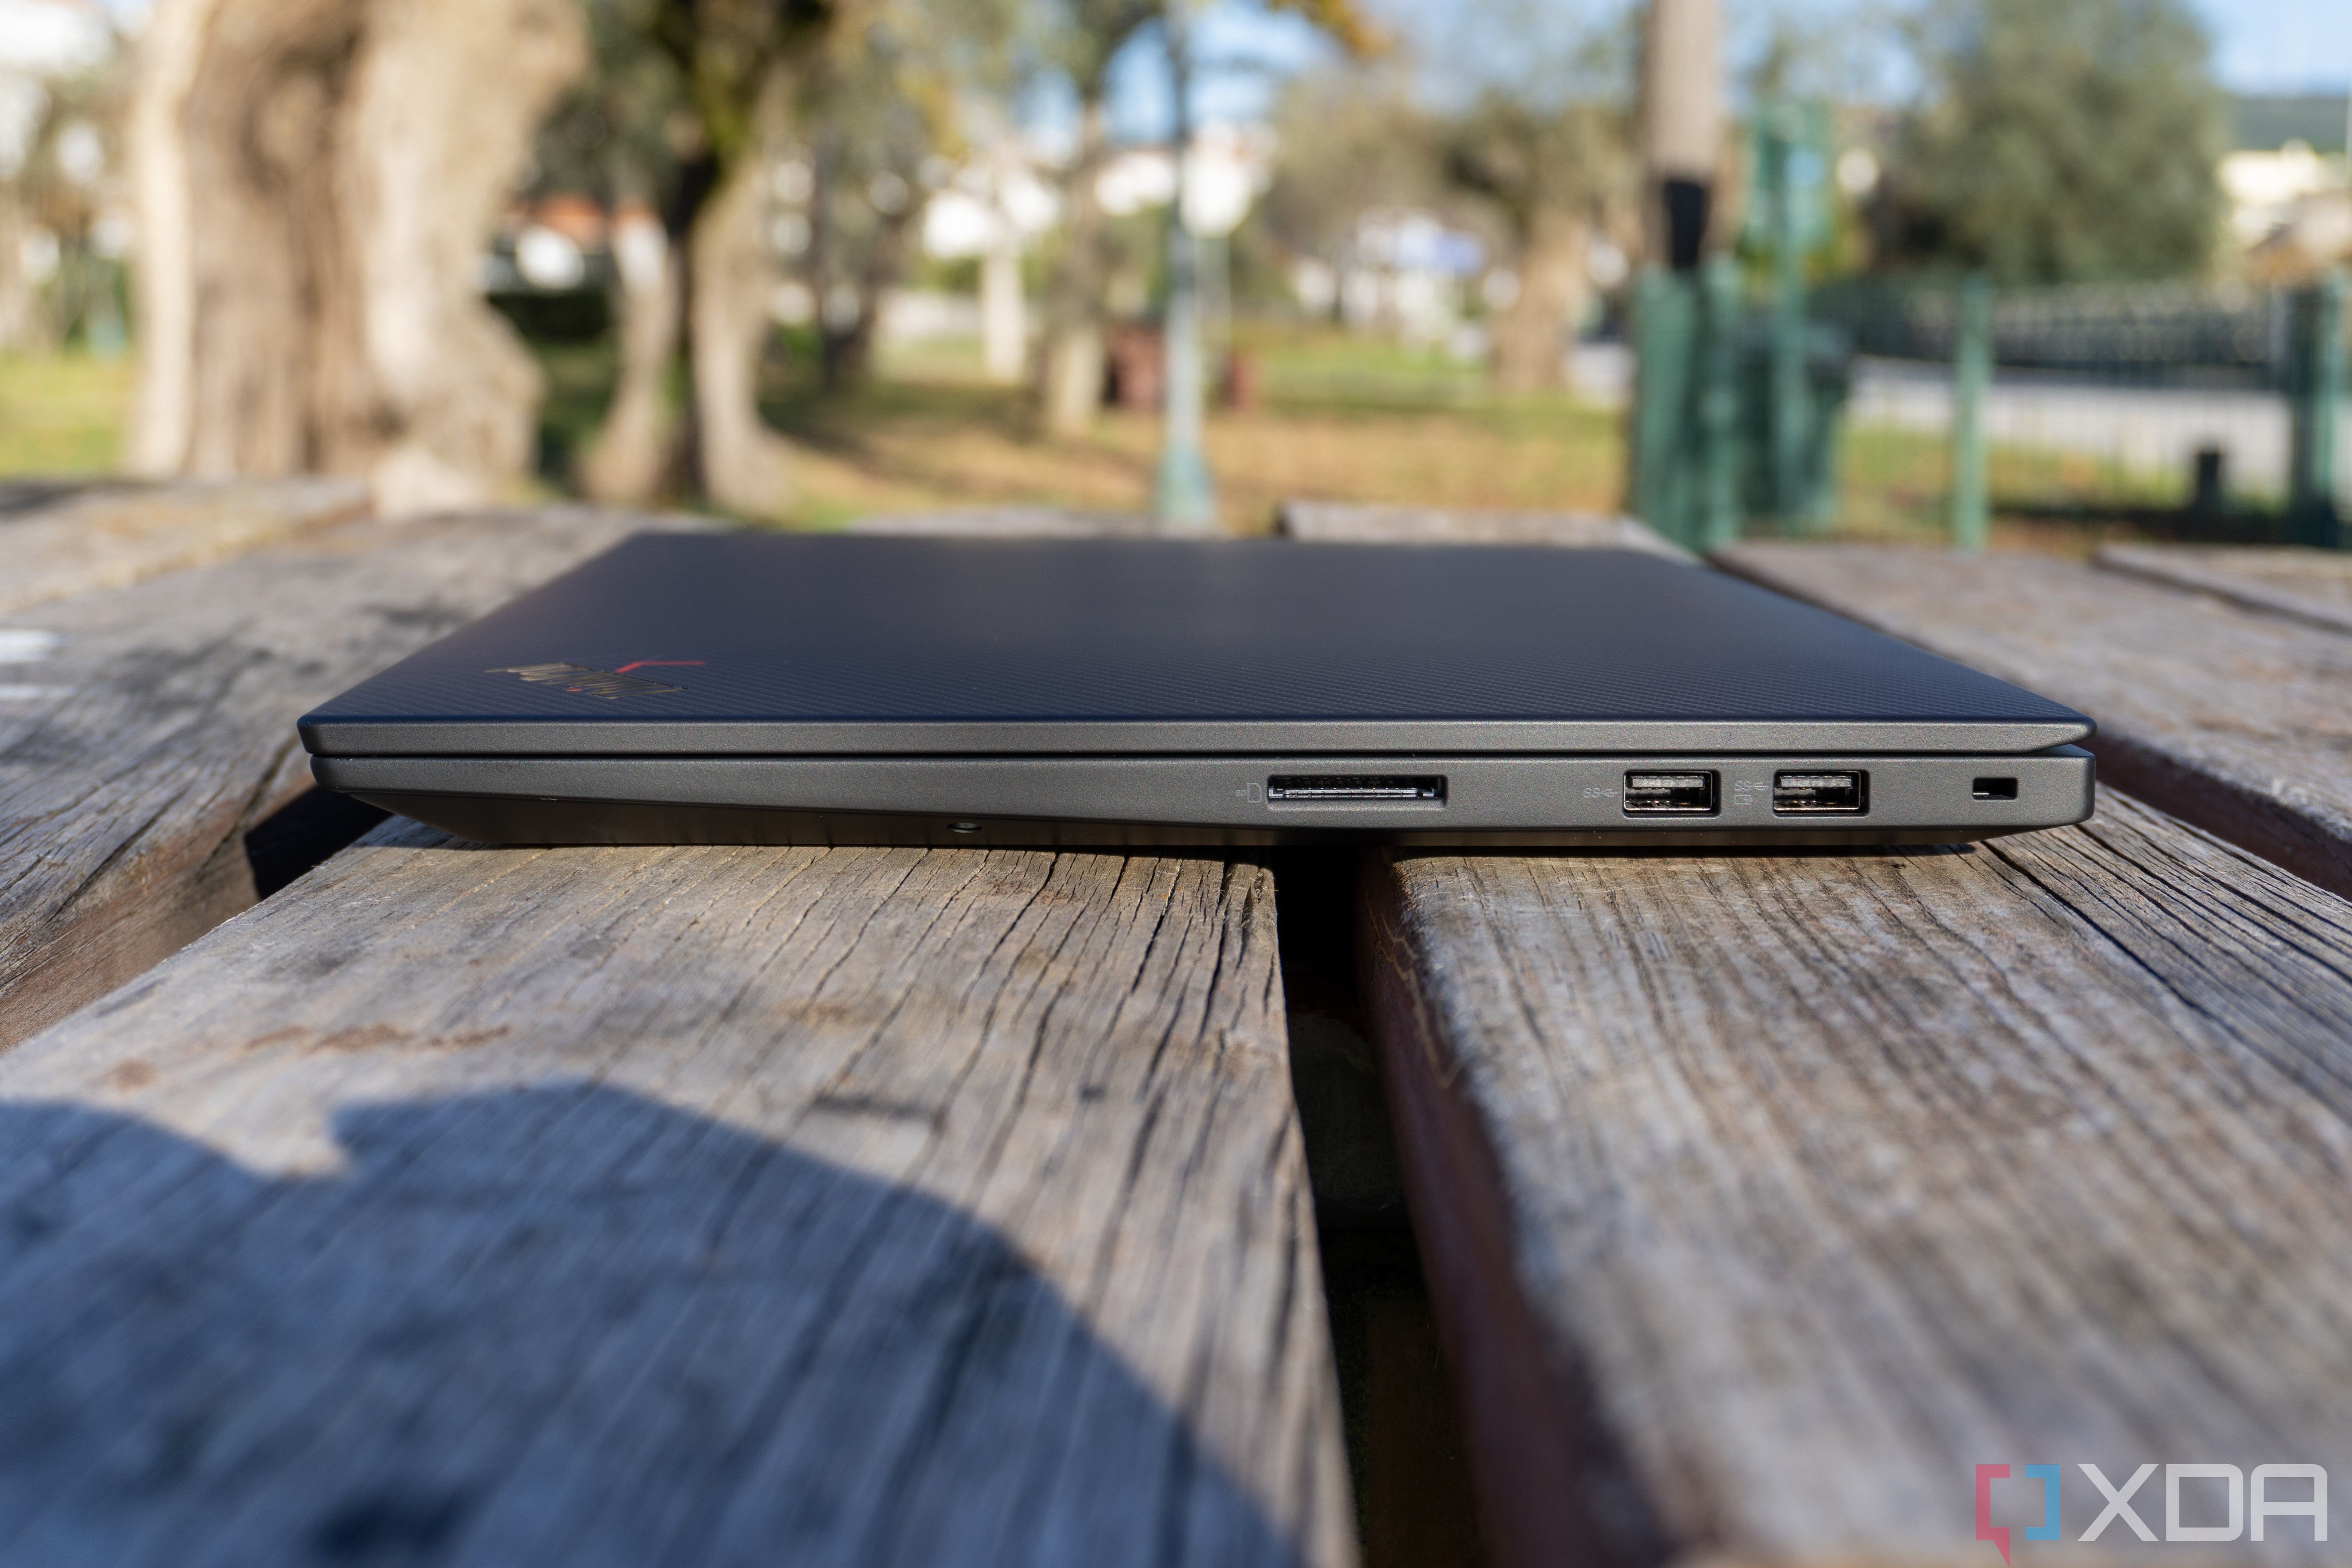 A right-side view of the Lenovo ThinkPad X1 Extreme Gen 5 laptop, showing an SD card slot, two USB Type-A ports, and a Kensington lock slot